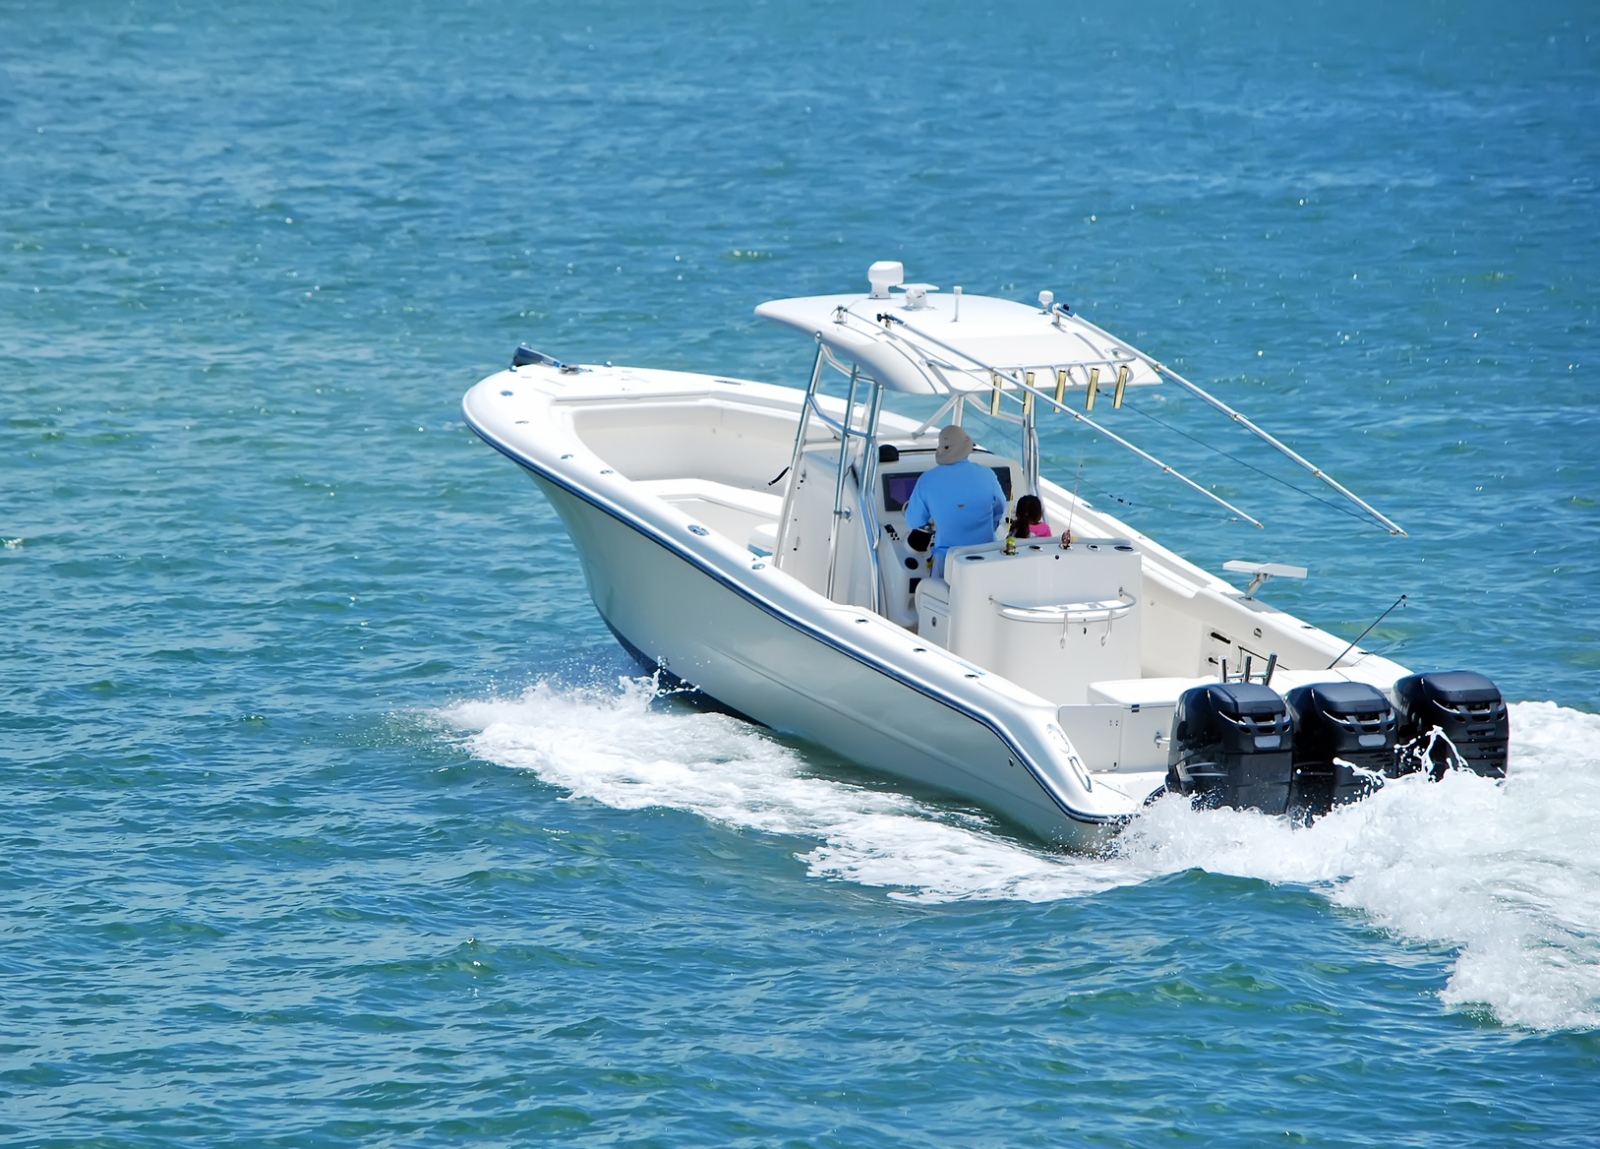 Five Reasons to Sell Your Boat Before Winter